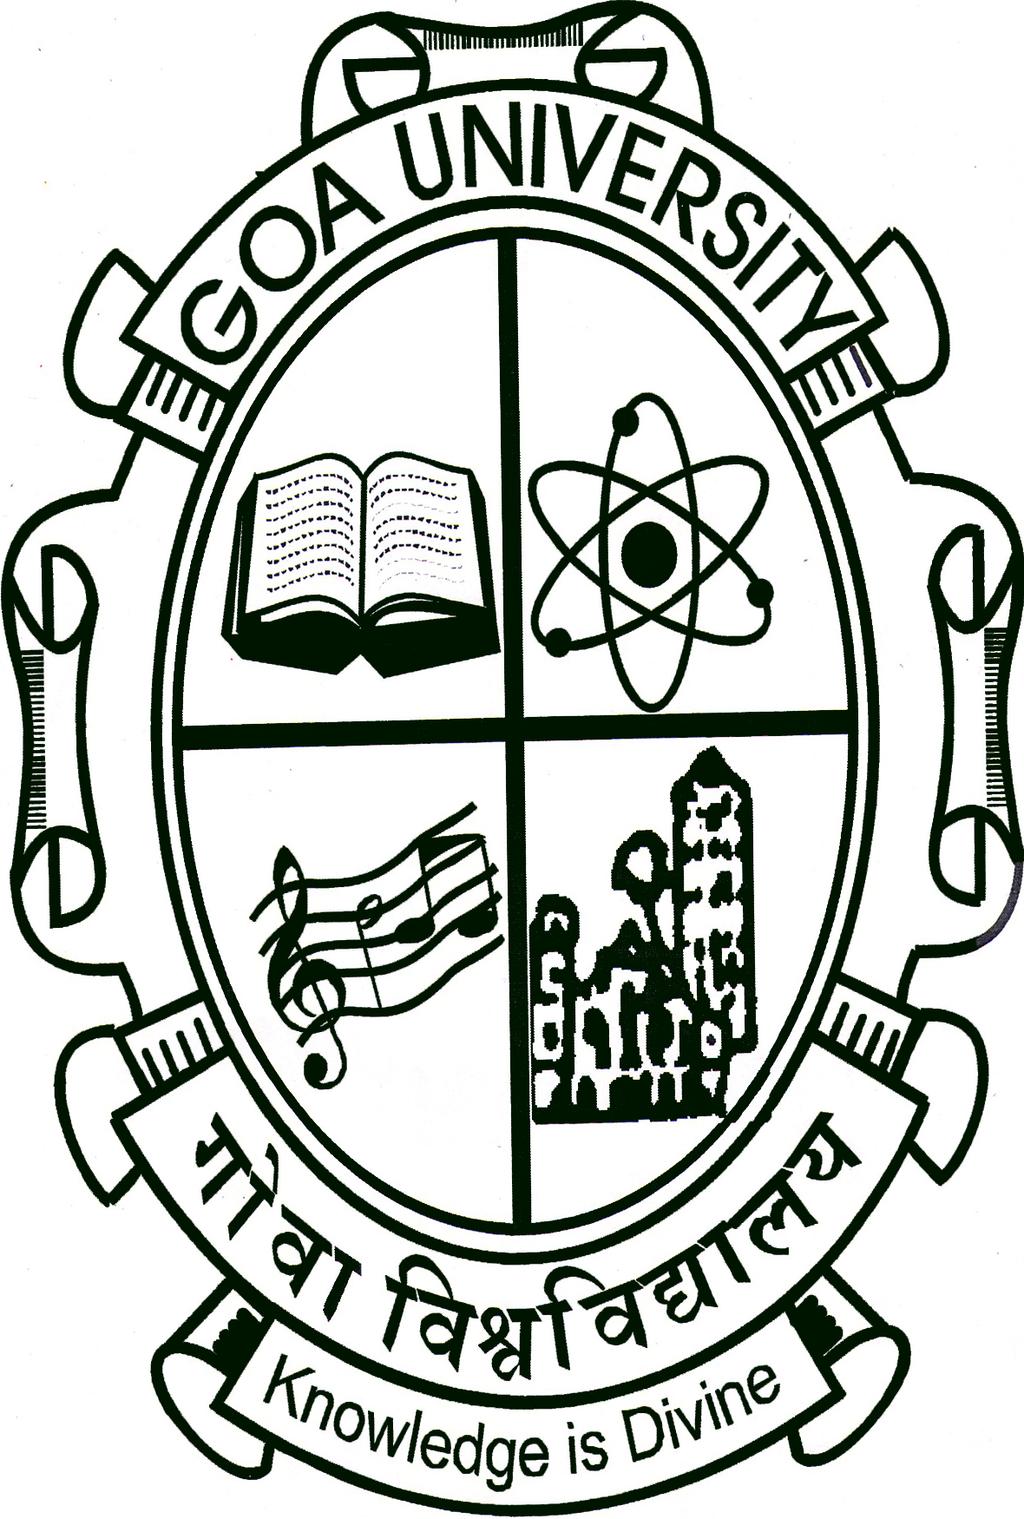 Taleigao Plateau, Sub Post, Goa 403206 India. FACULTY :-FACULTY OF COMMERCE AND MANAGEMENT STUDIES DEPARTMENT OF COMMERCE PROGRAMME :-Ph.